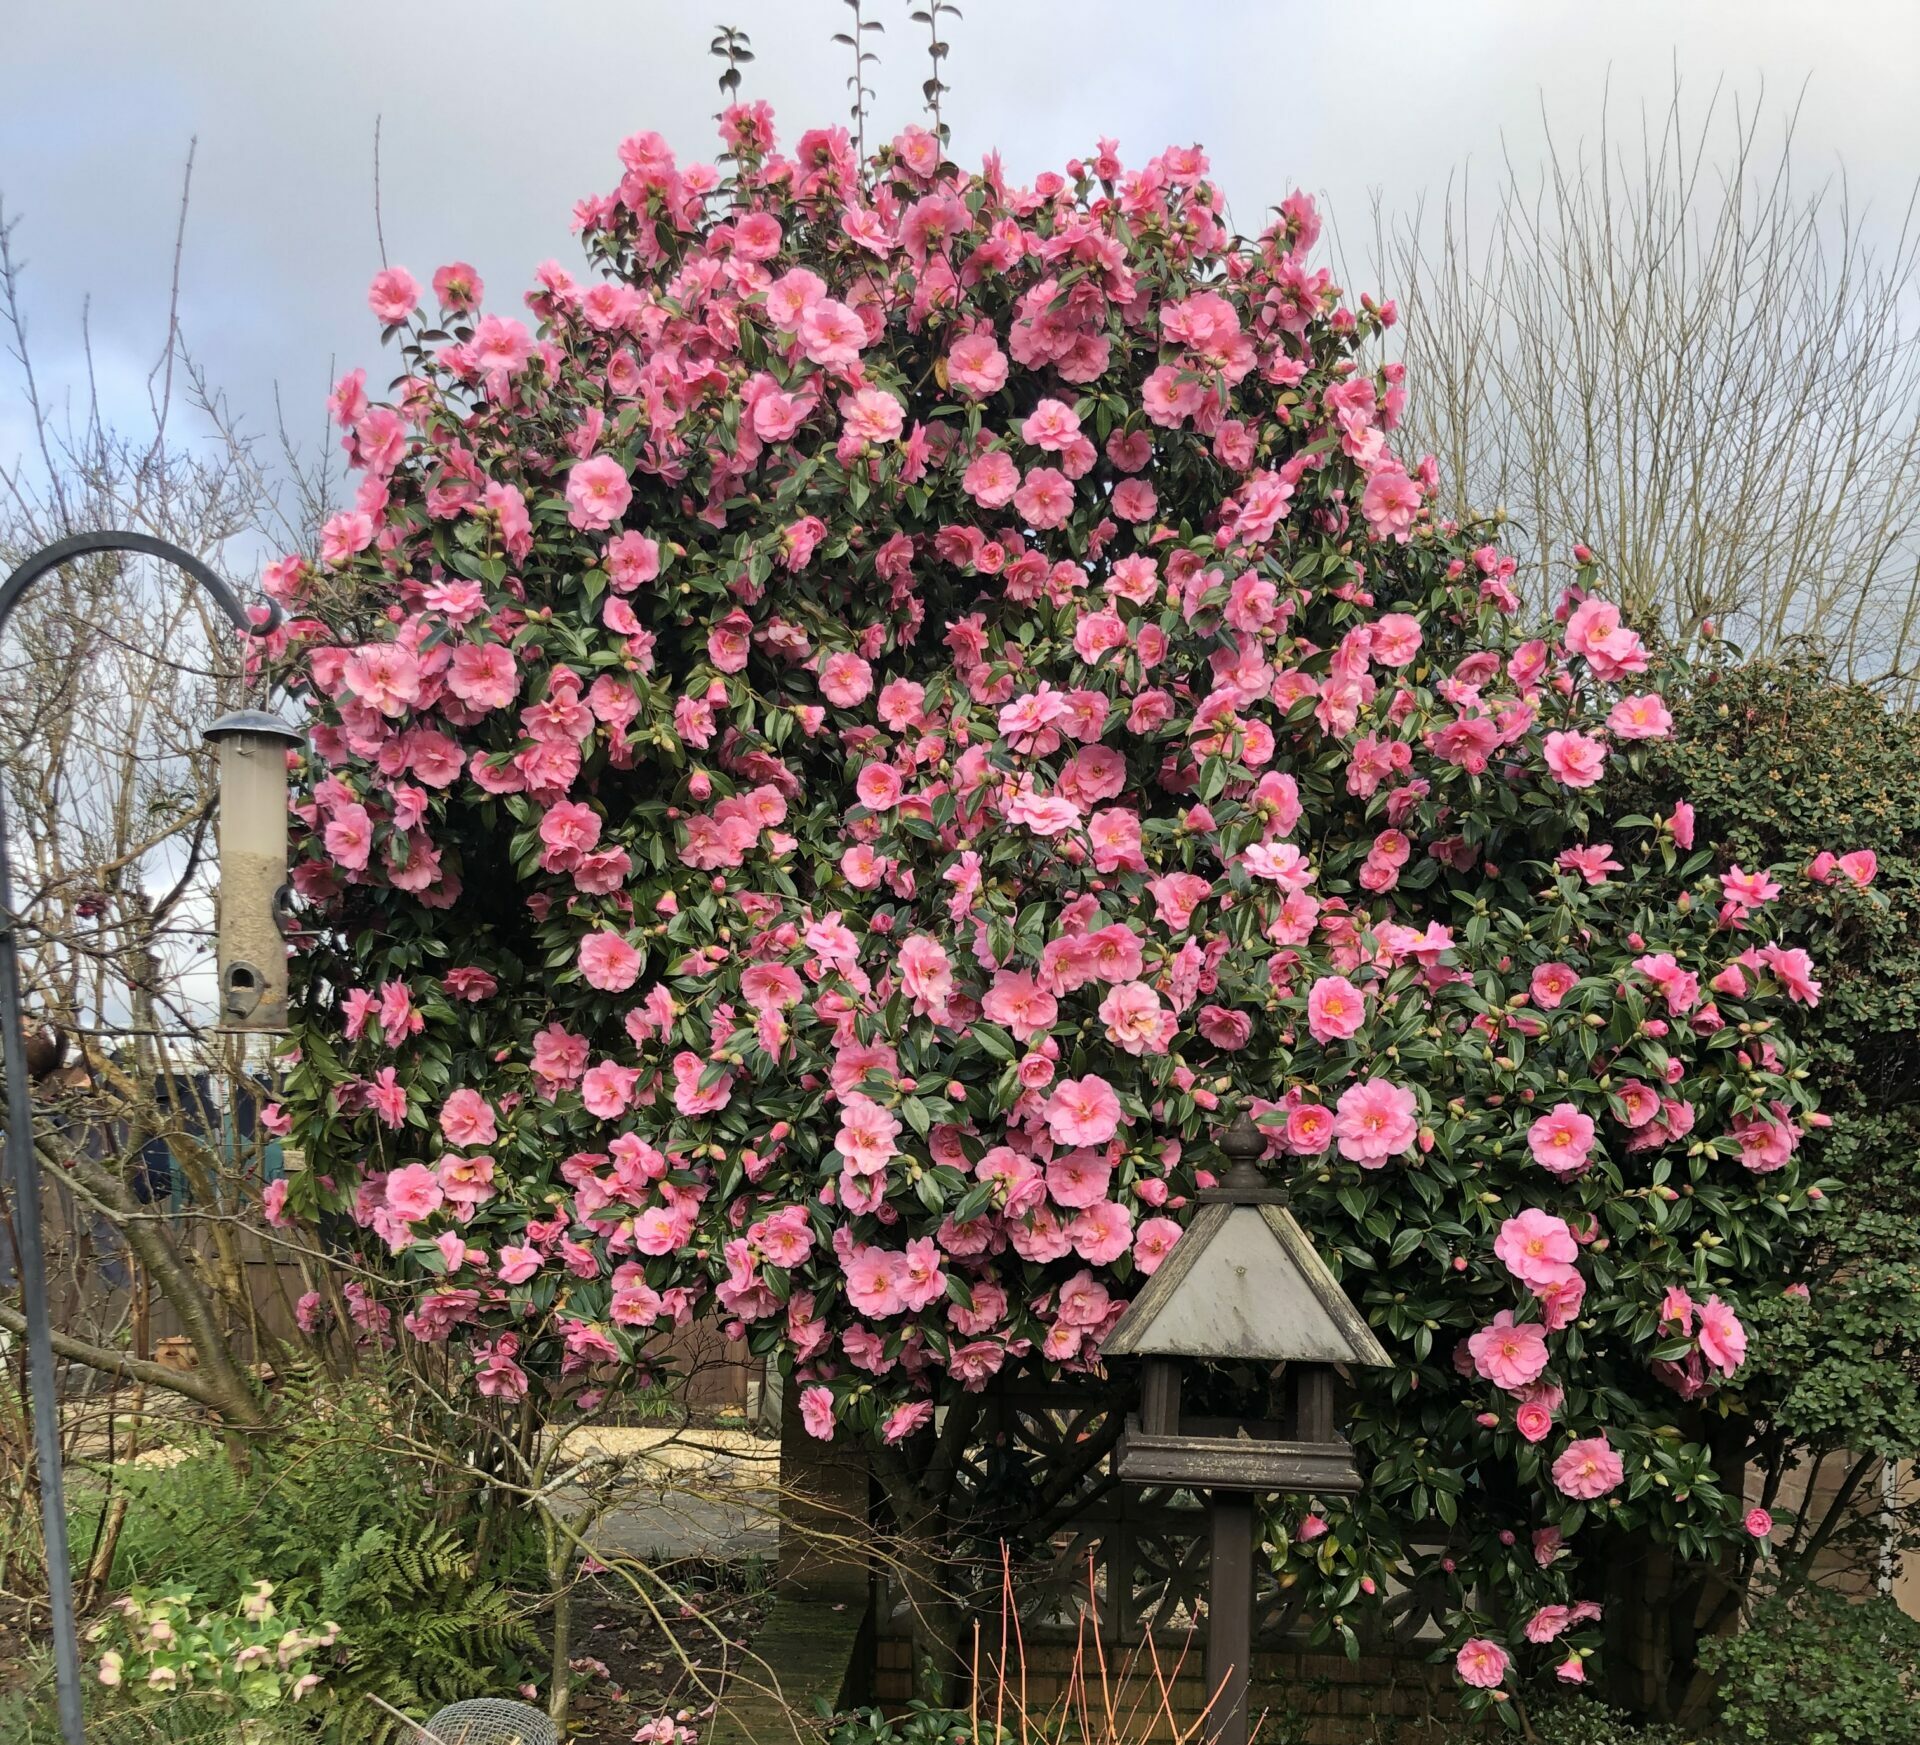 Camelia in bloom during spring